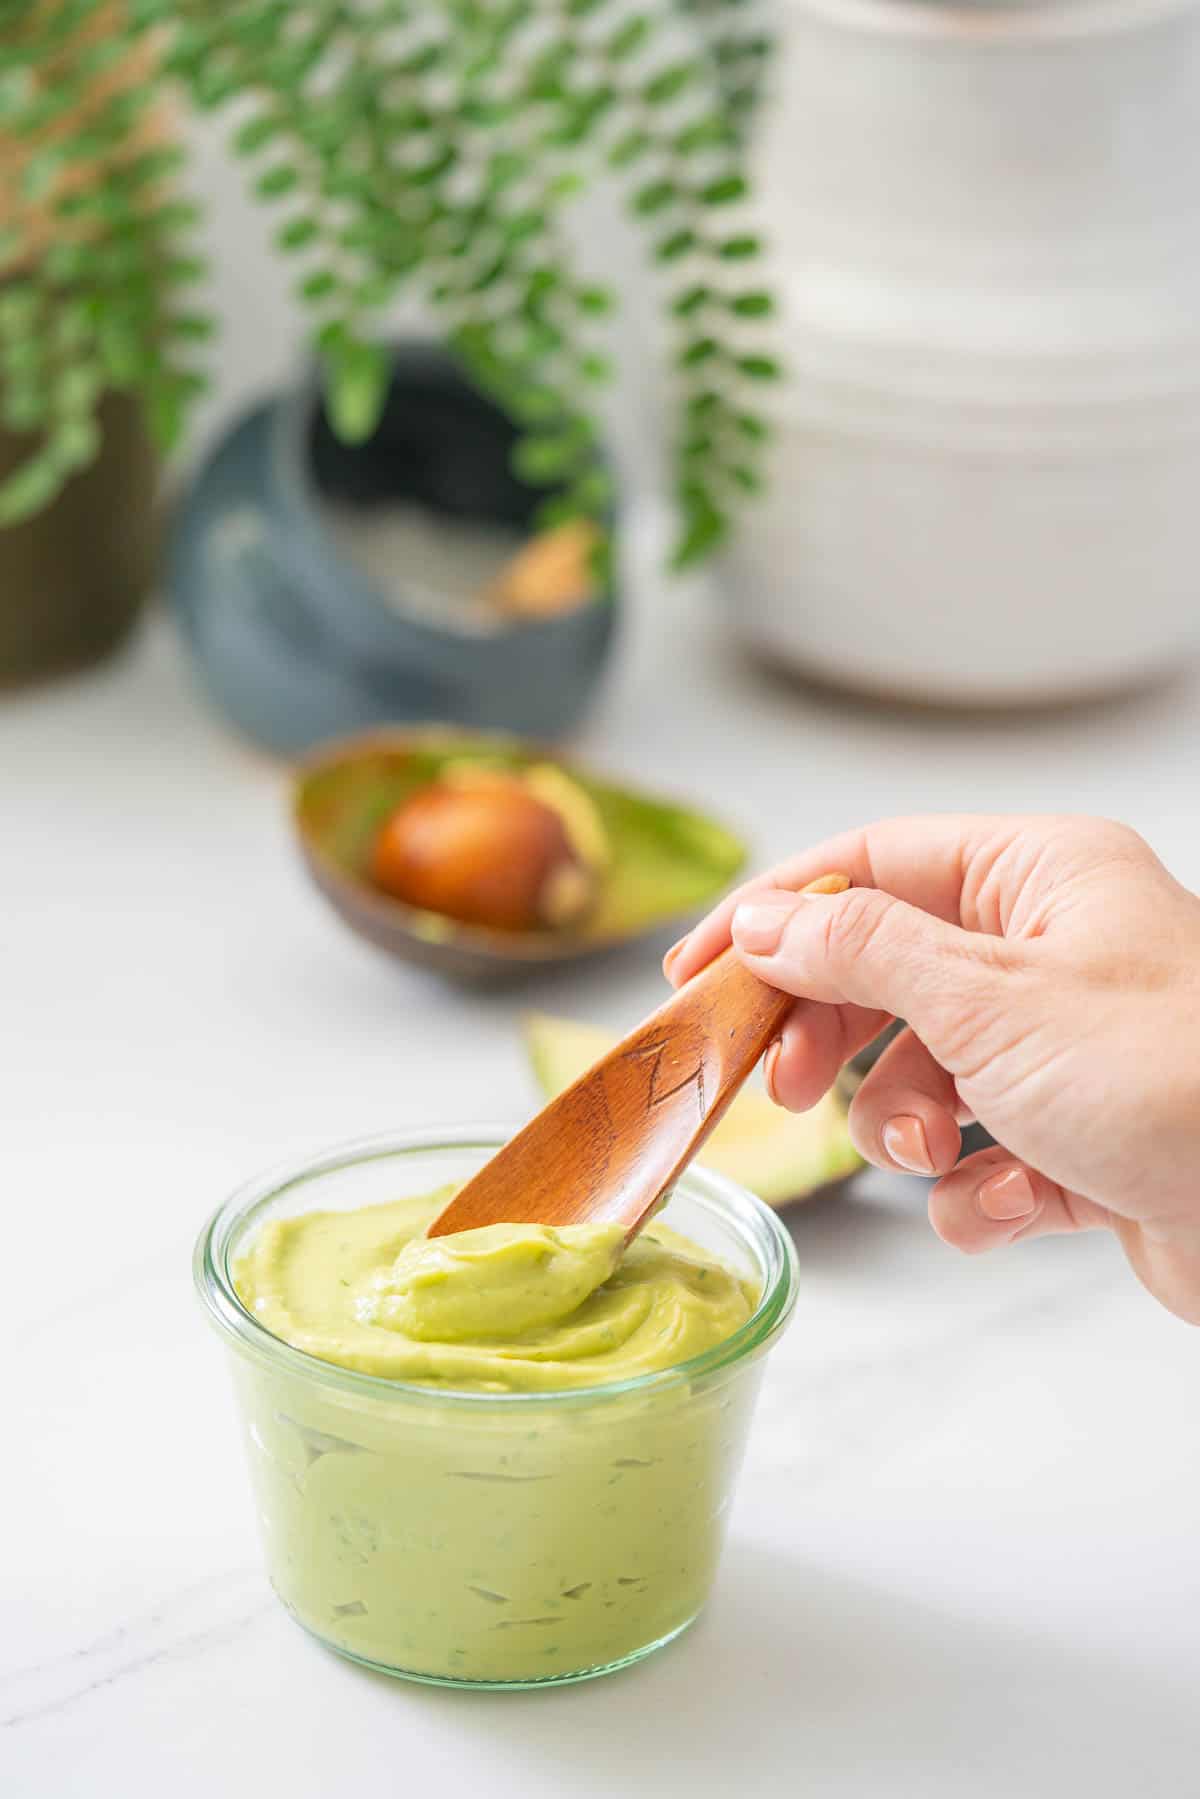 A glass jar filled with creamy avocado being scooped out with a small wooden spoon.